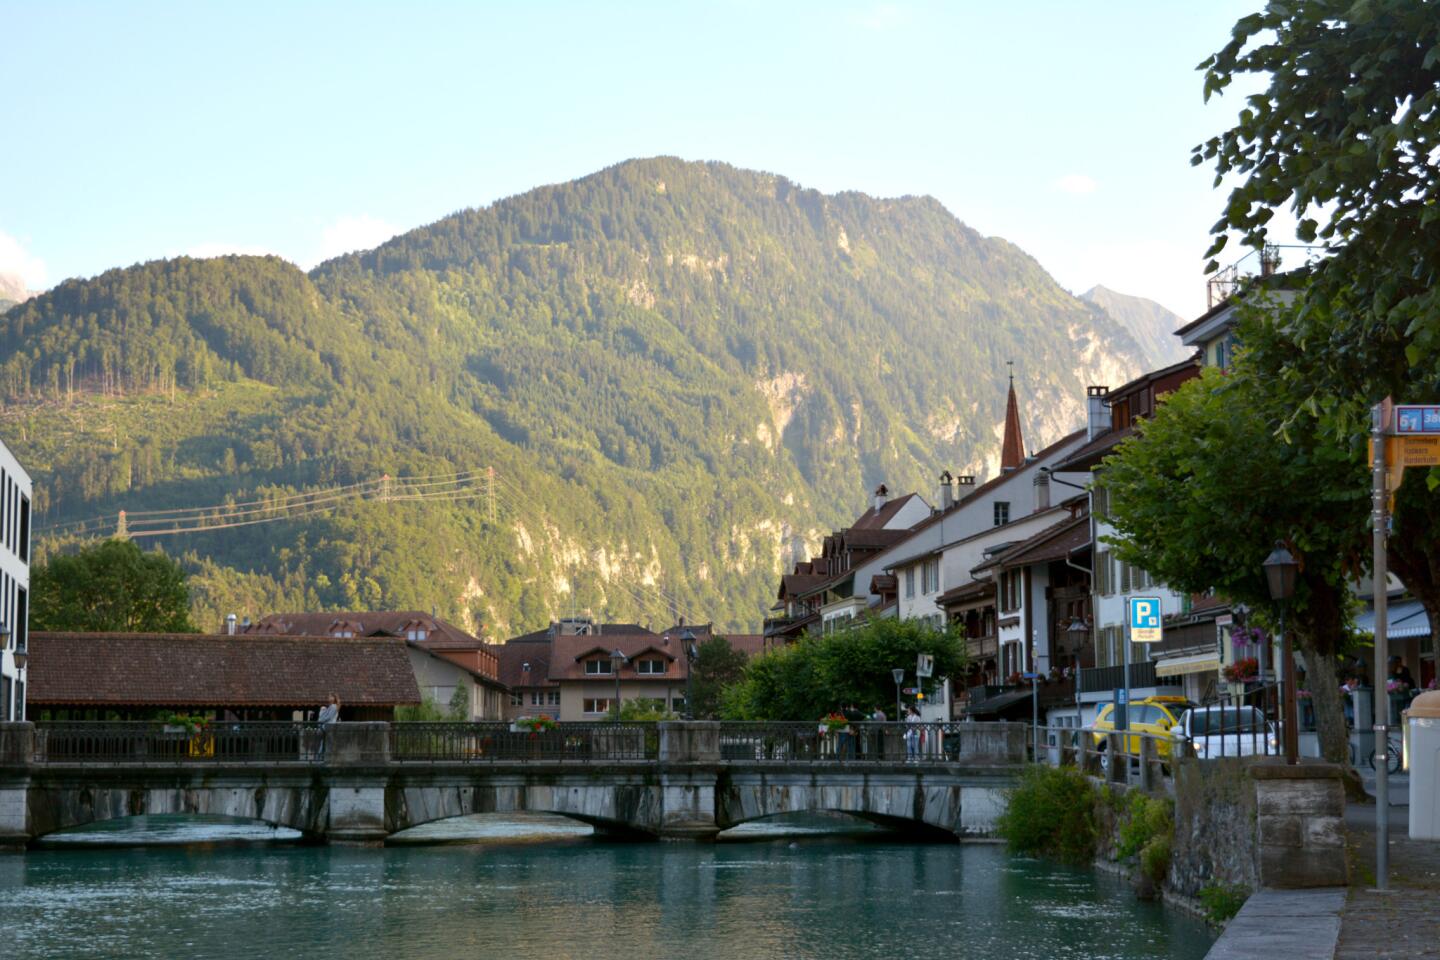 Interlaken, a popular resort town, derives its name from its location between two lakes, Thun and Brienz.